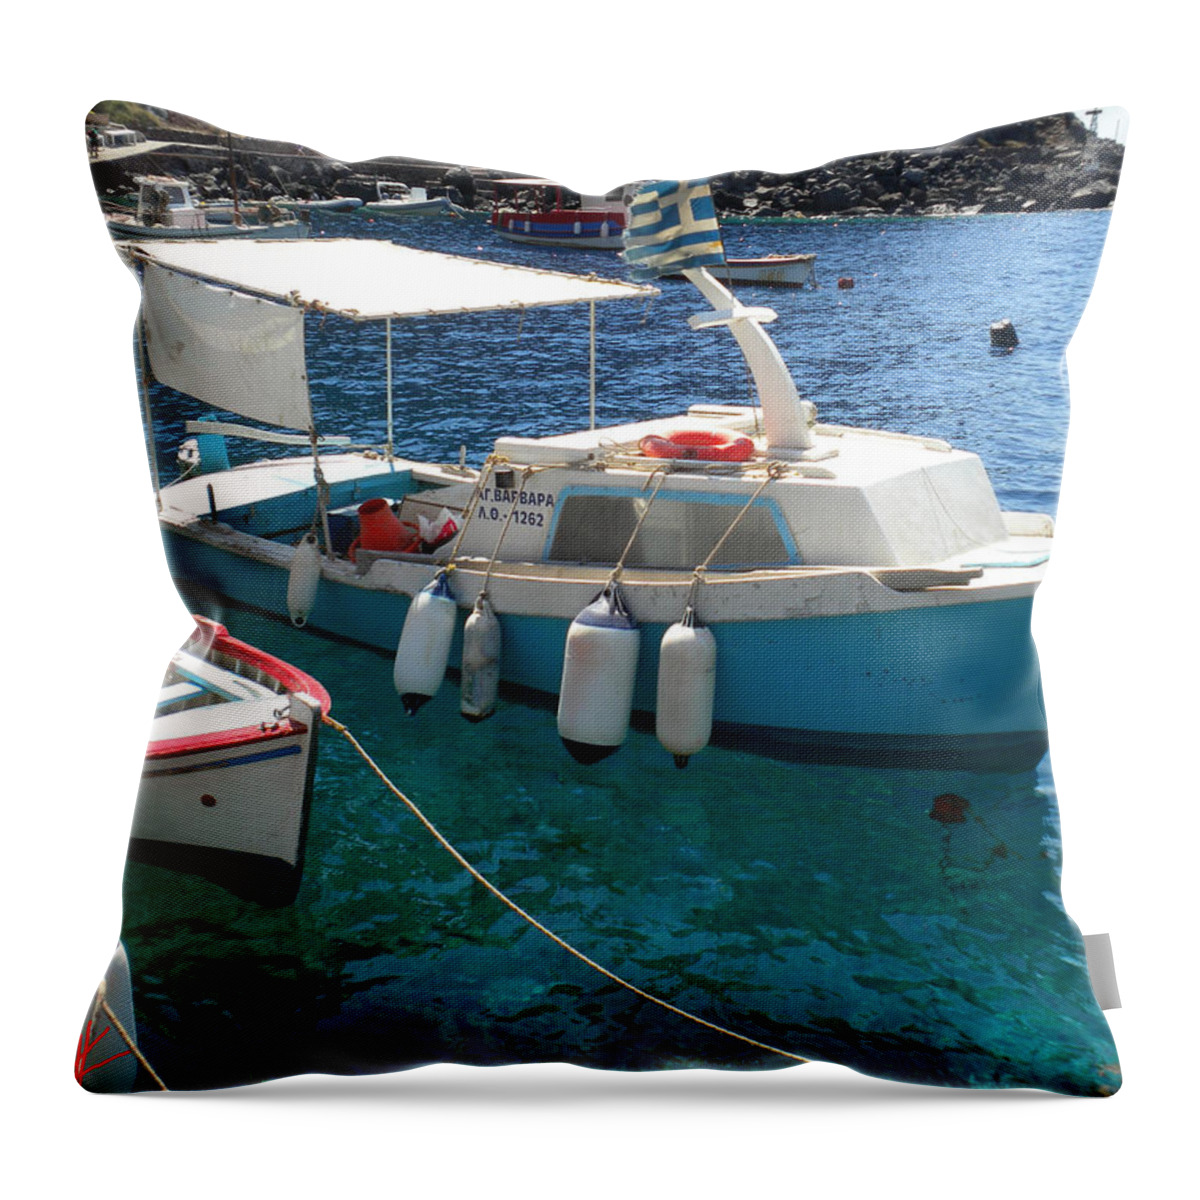 Colette Throw Pillow featuring the photograph Cute Little Santorini Fish Boats by Colette V Hera Guggenheim